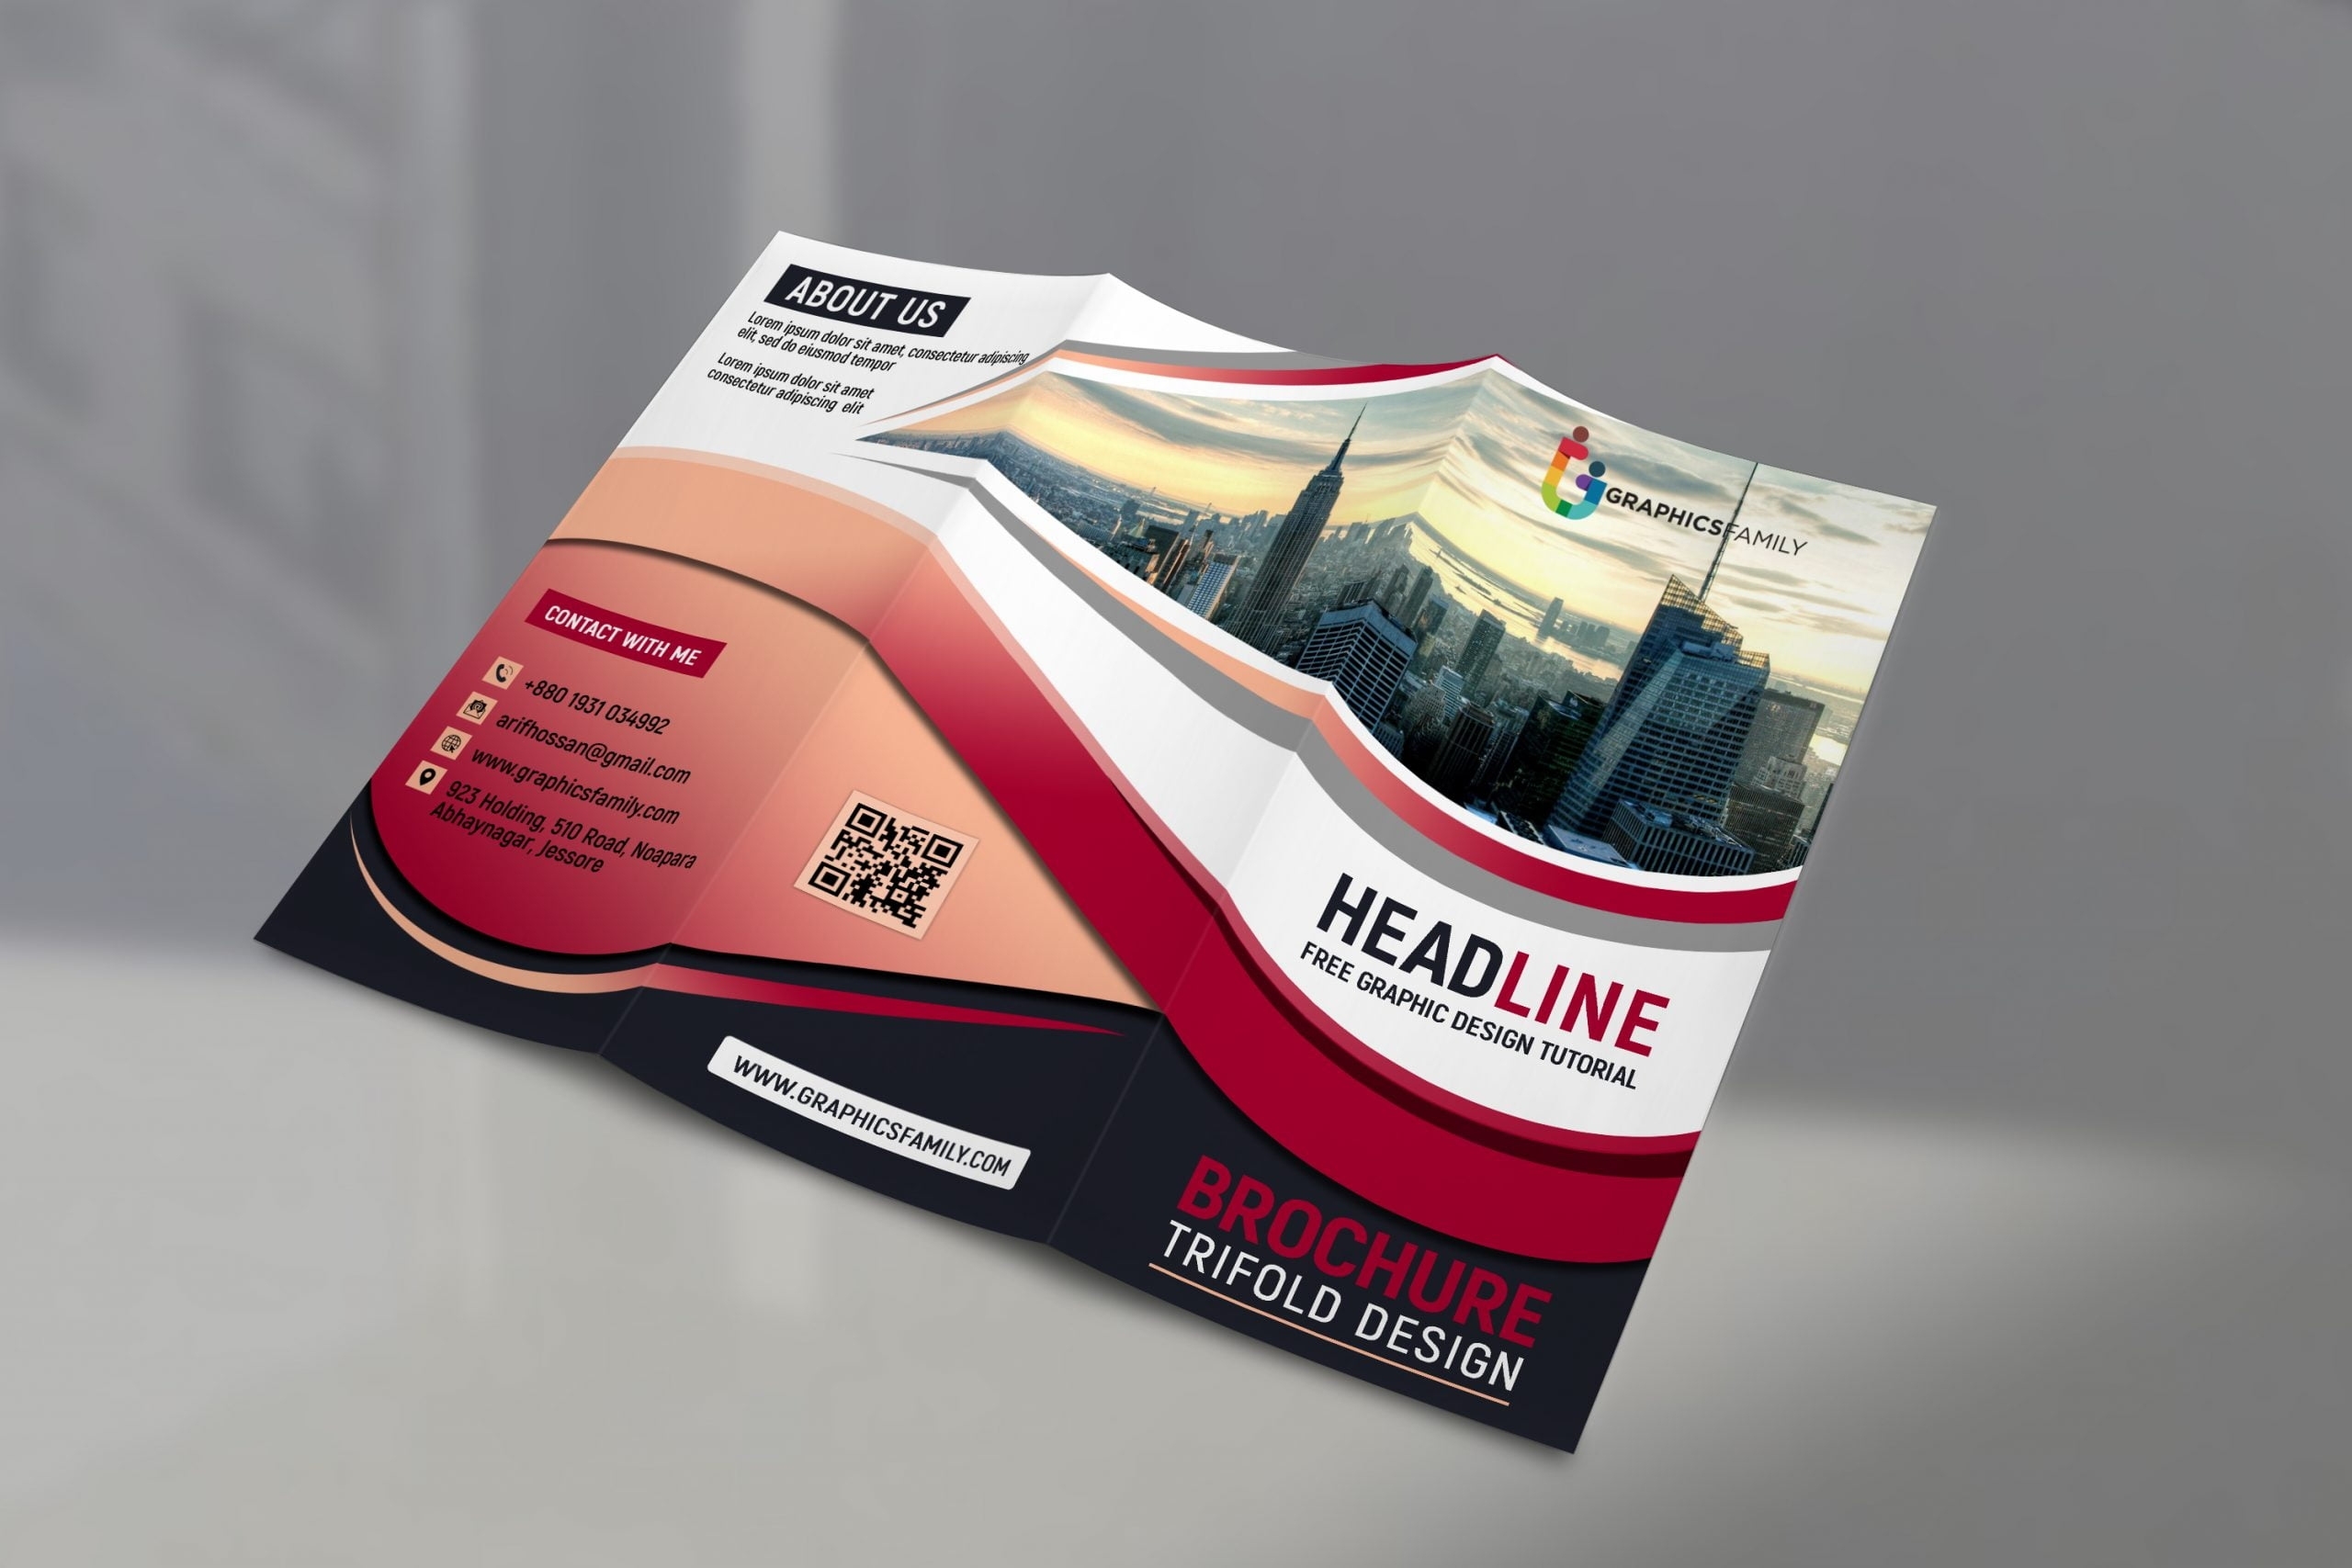 Free Business Promotion Tri Fold Brochure Design Template - Graphicsfamily for Free Tri Fold Business Brochure Templates